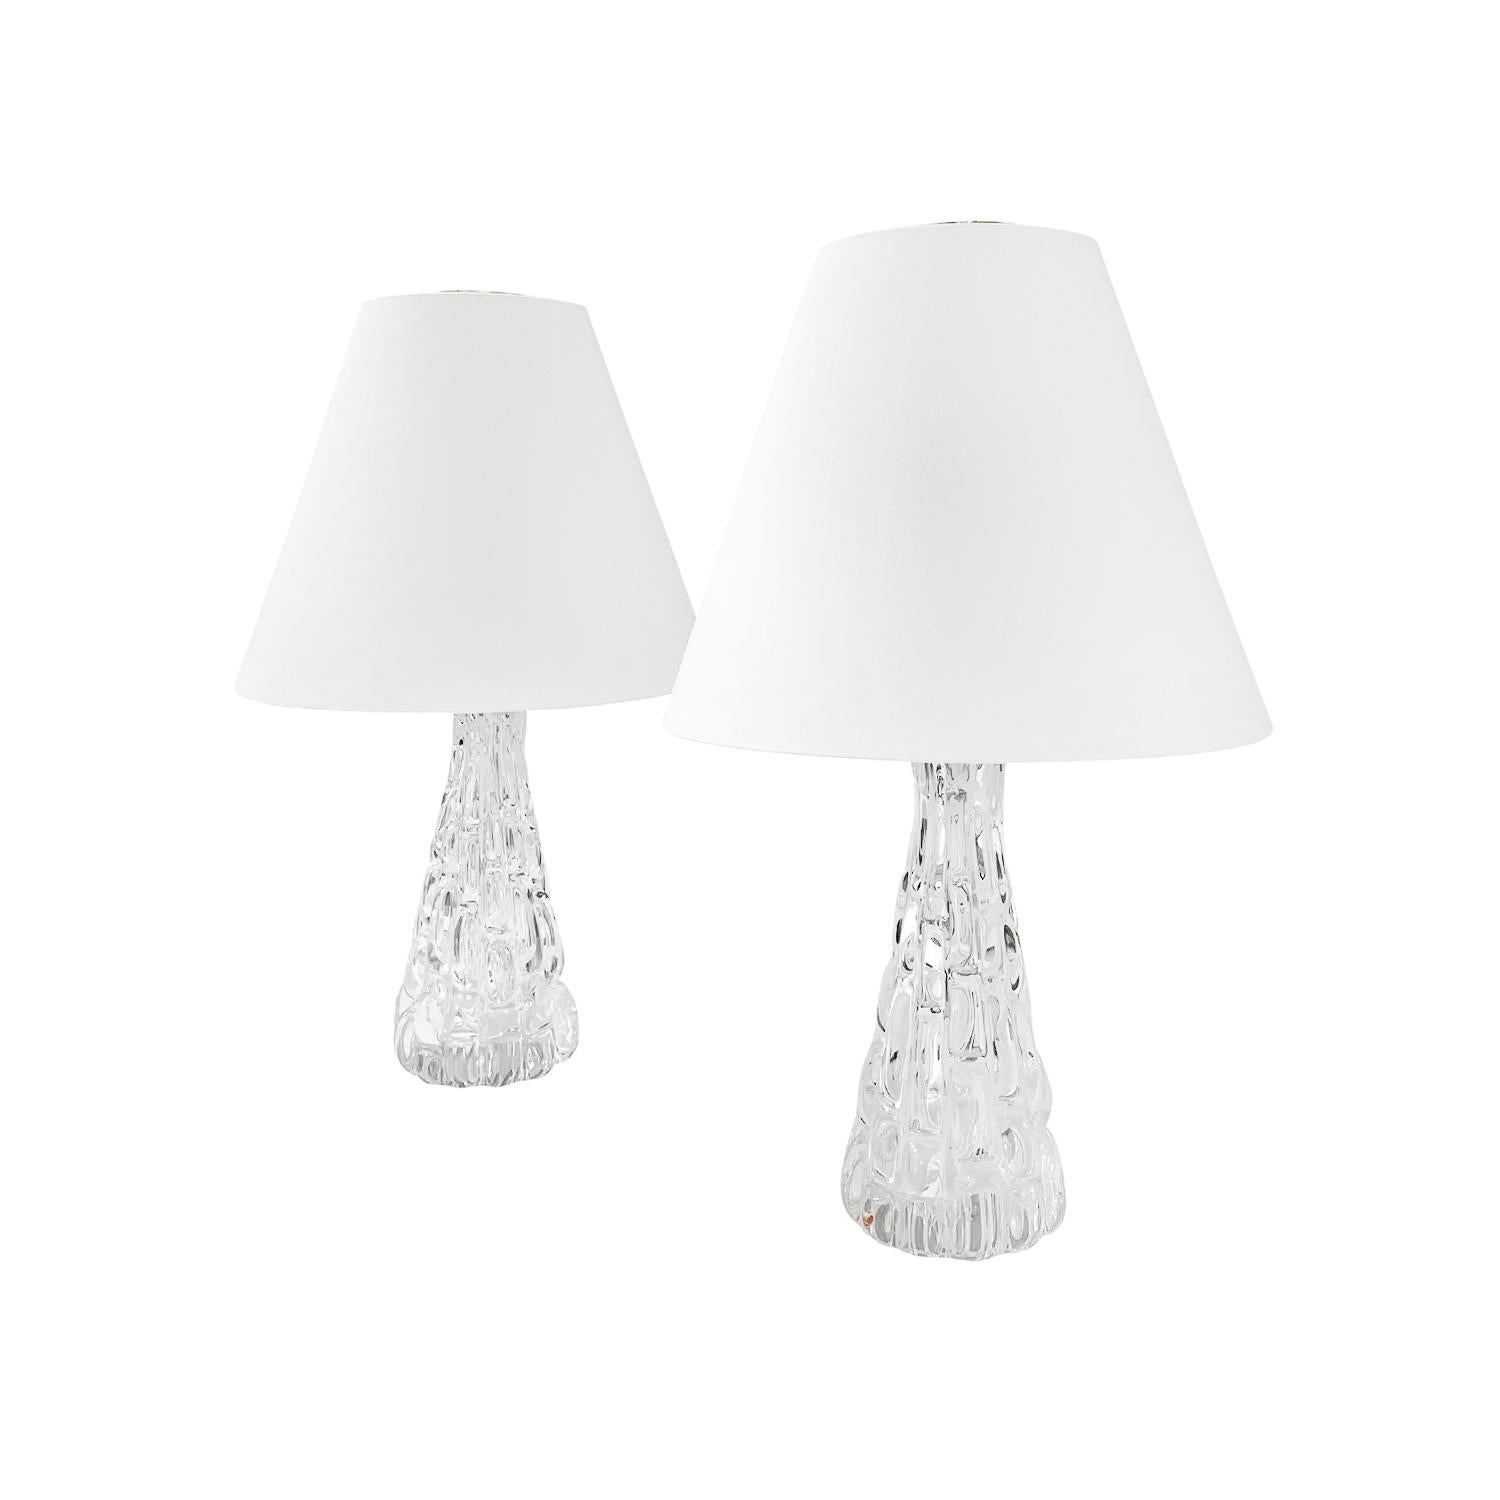 Mid-Century Modern 20th Century Swedish Pair of Orrefors Chrome Table Lights by Carl Fagerlund For Sale